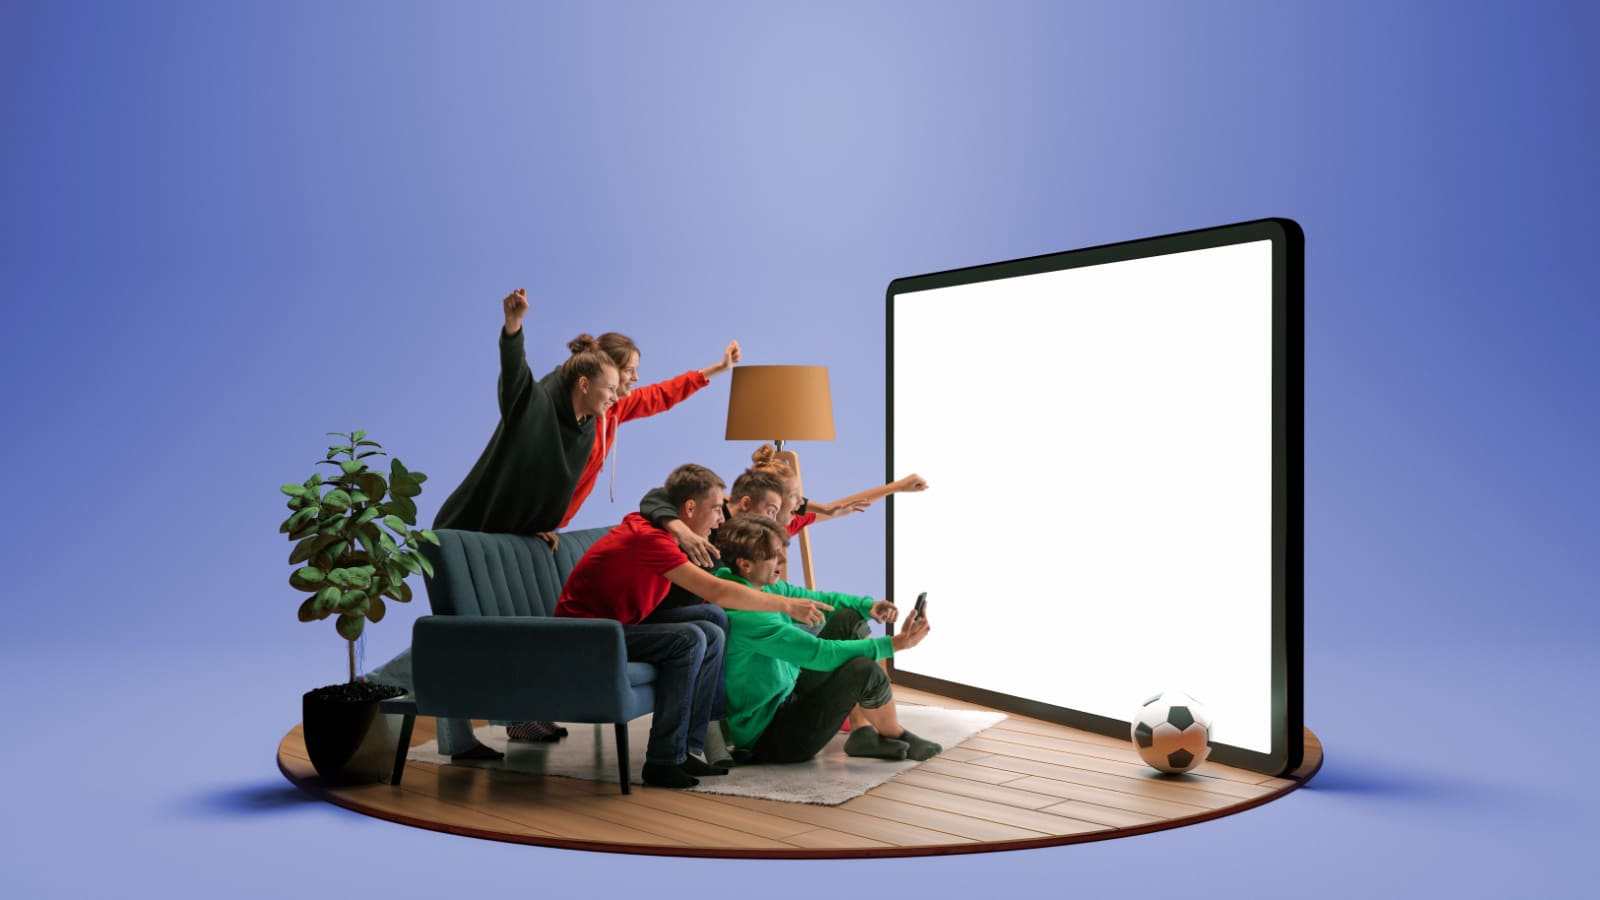 Goal. Group of young emotional friends watching football match, sport show or movie together. Excited girls and boys sitting in front of huge 3D model of device screen at home interior